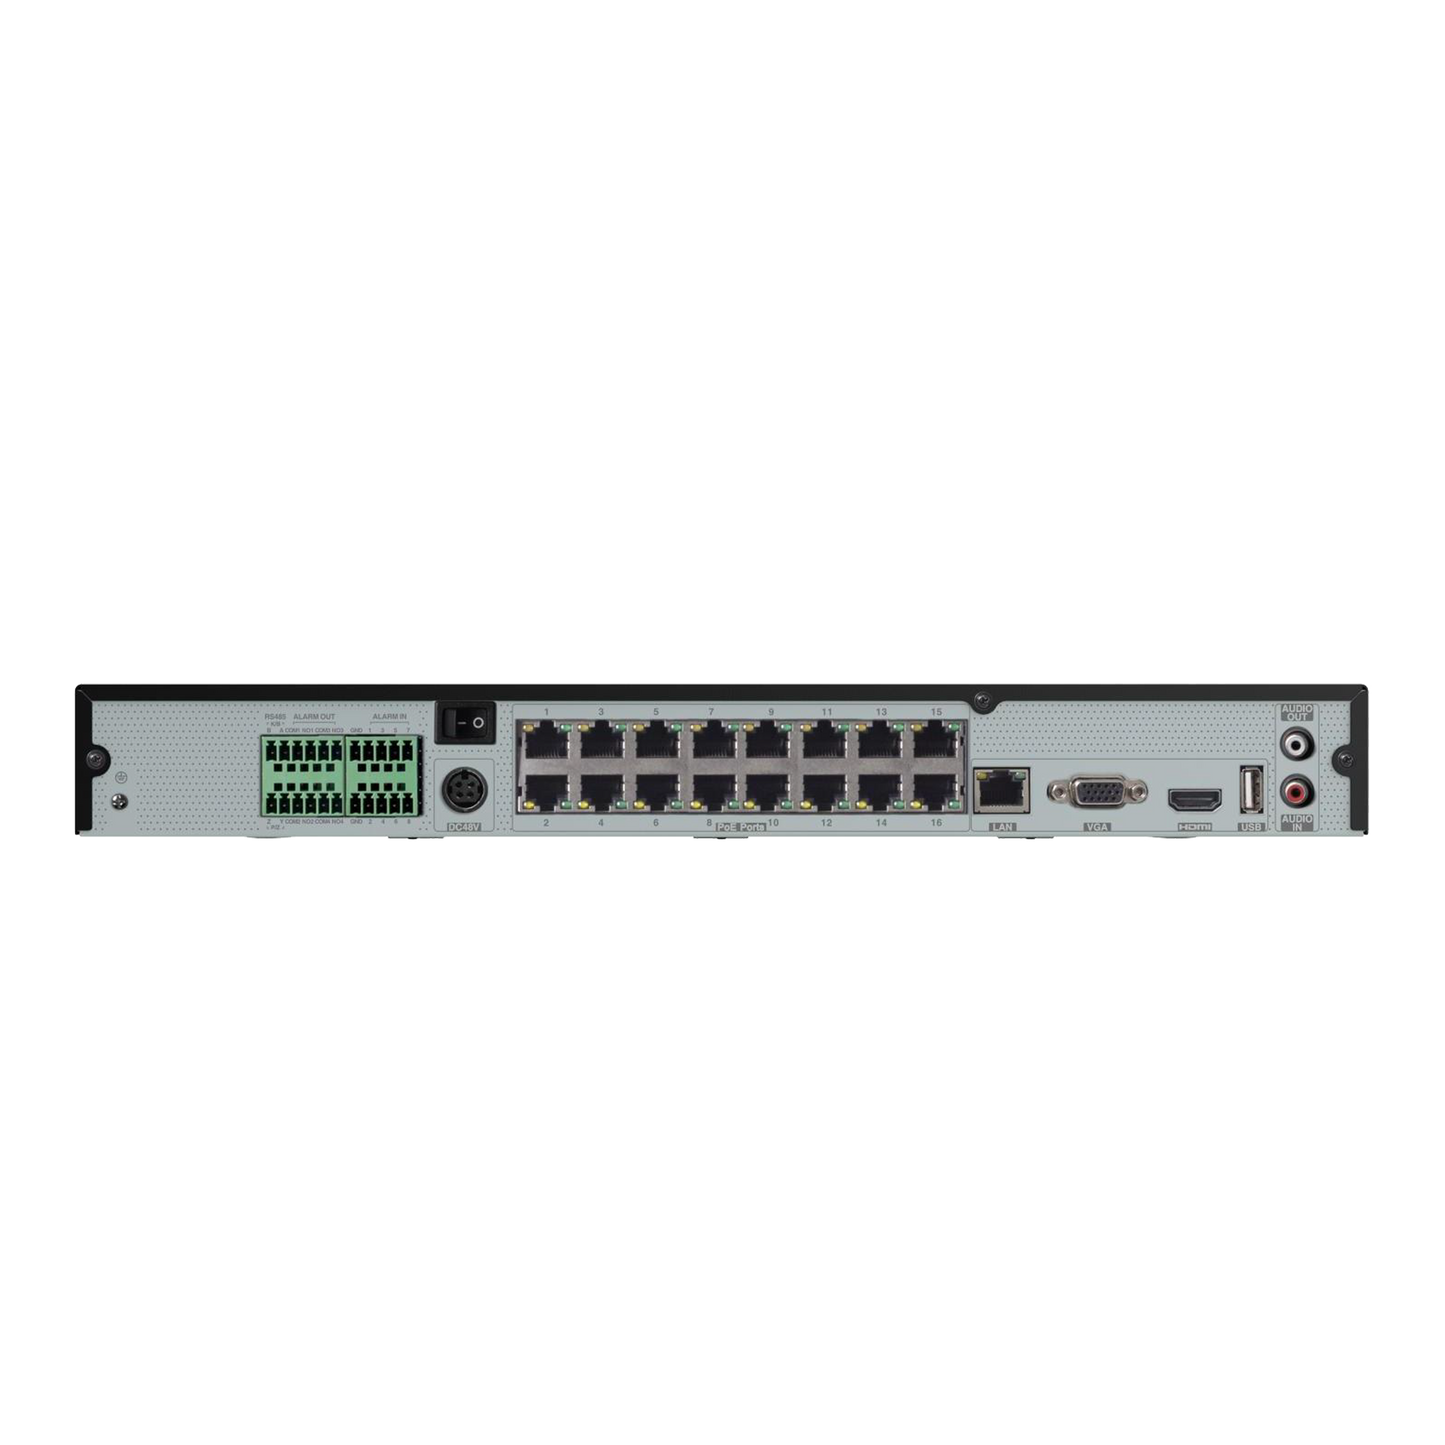 4K NVR w/ Facial Recognition & Smart Analytics 16 Channel NVR with 16 Built-in PoE Ports, 2-32TB Storage